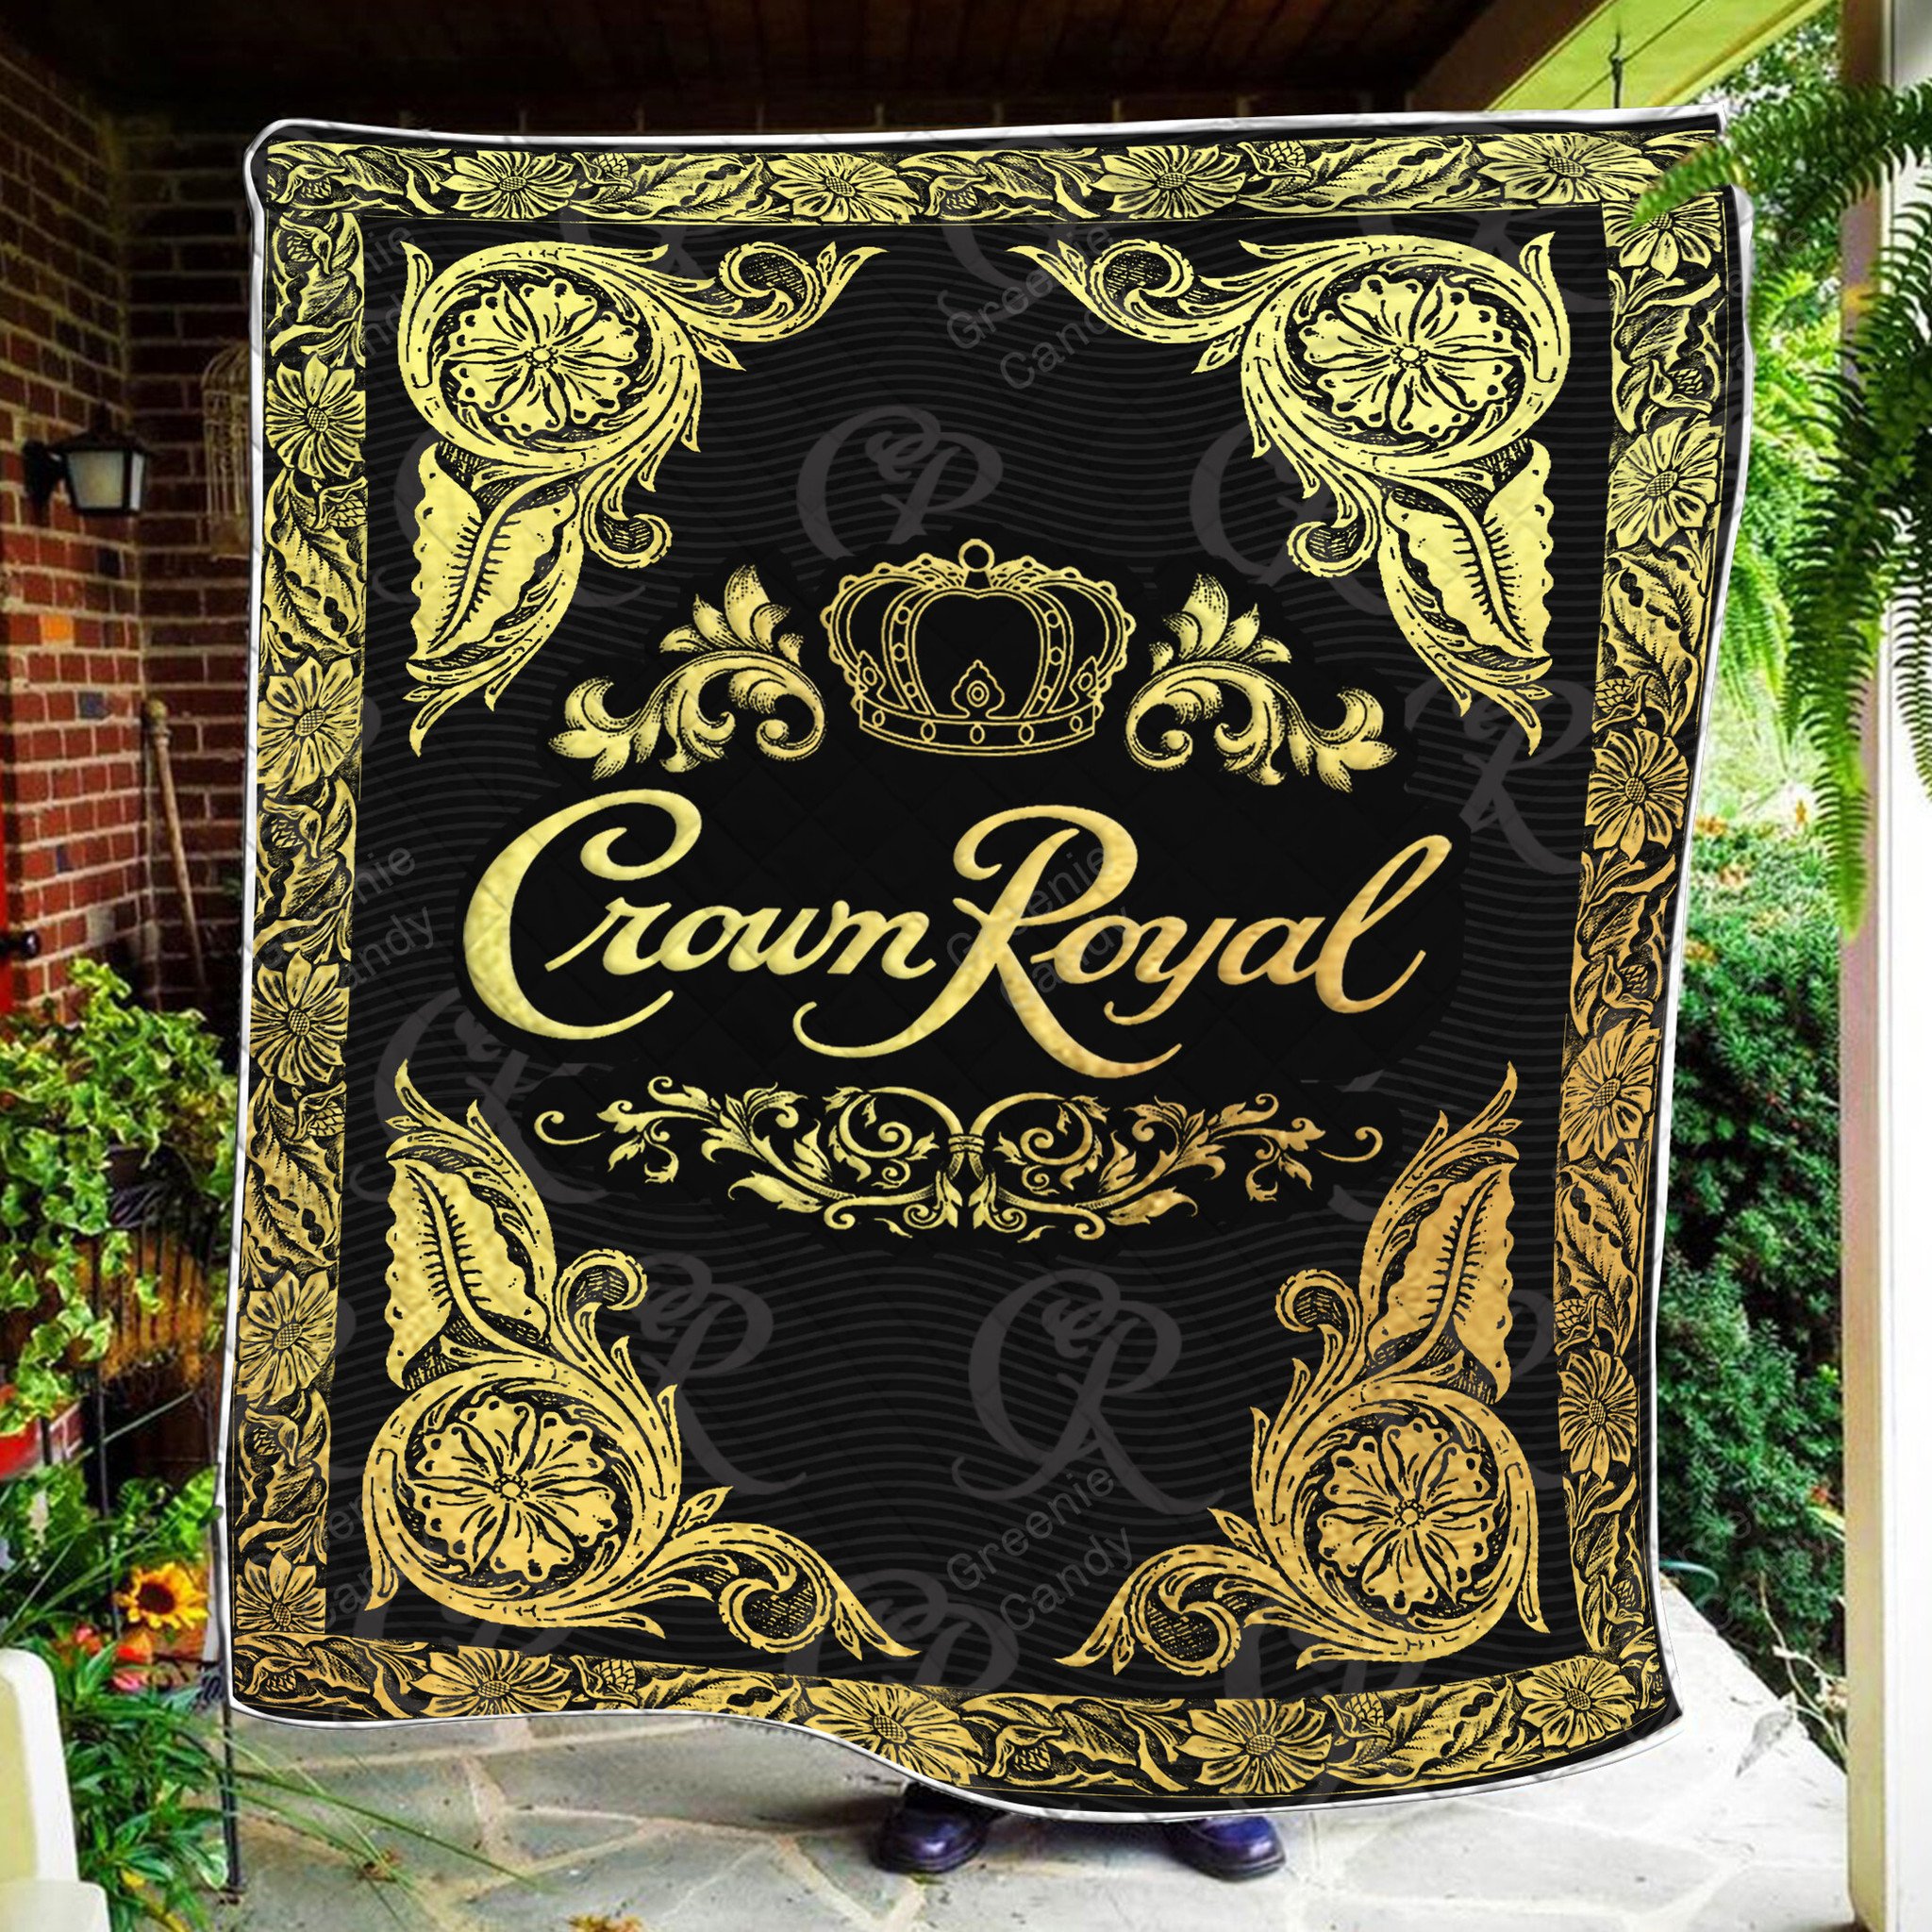 NEW Crown Royal Black Whiskey Quilt 7